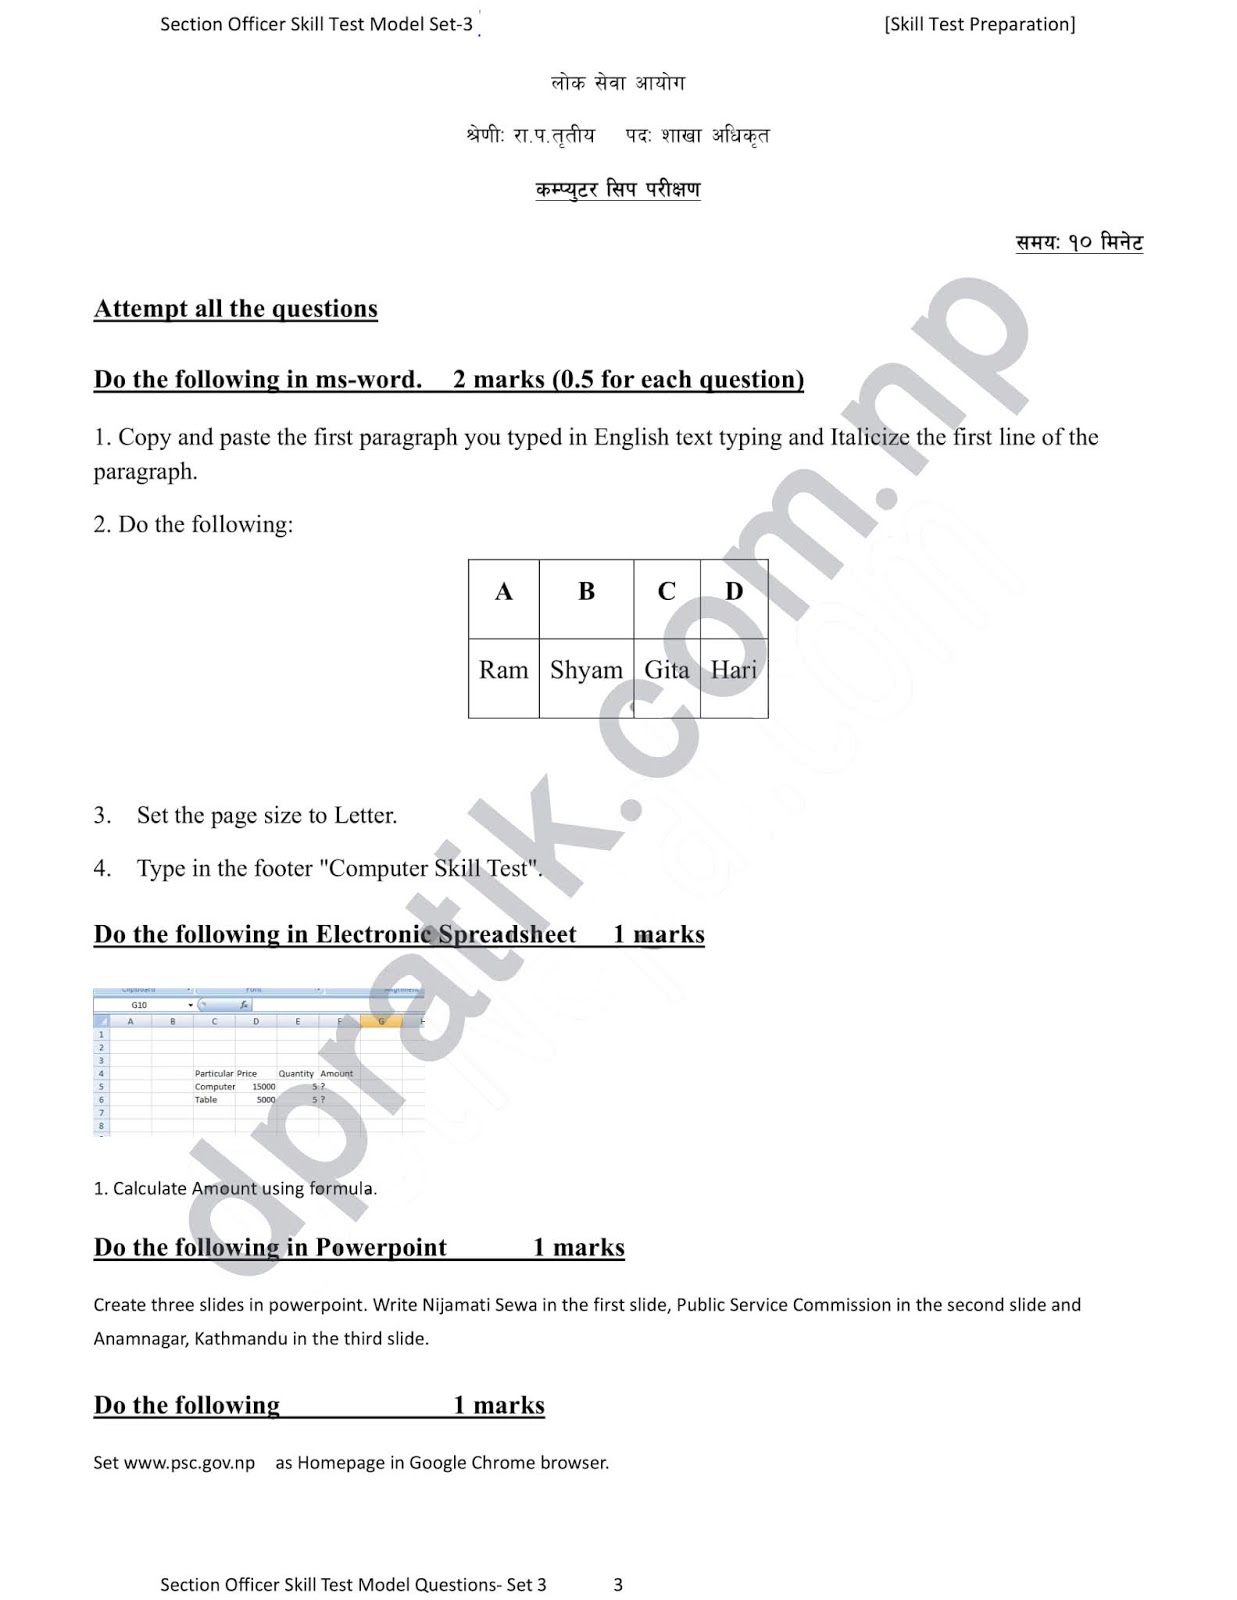 Computer Skill Test Practice Question Set 1 For Section Officer, Na.Su And Kharidar